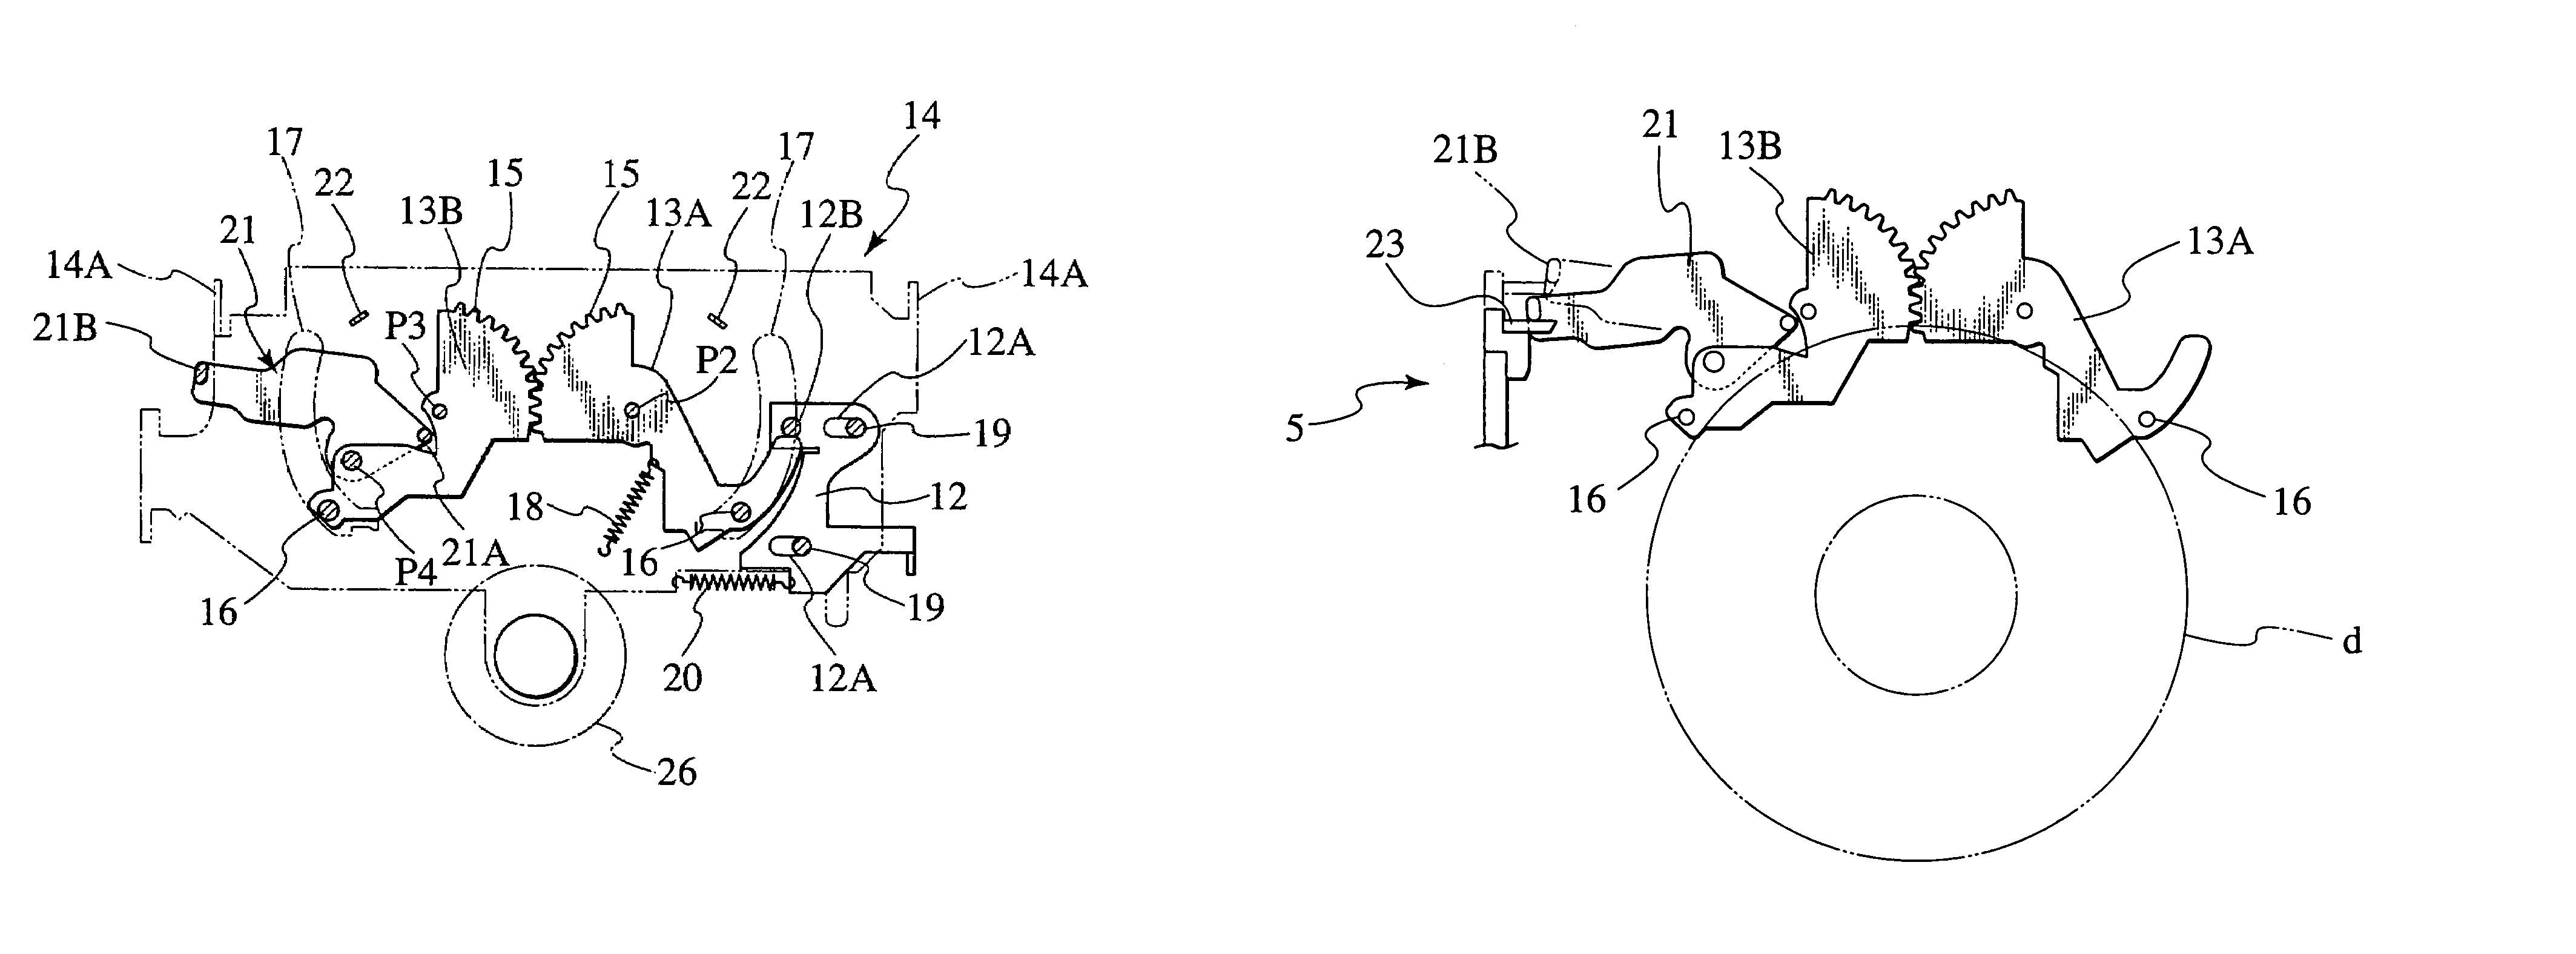 Disc drive apparatus with loading mechanism for different sized discs